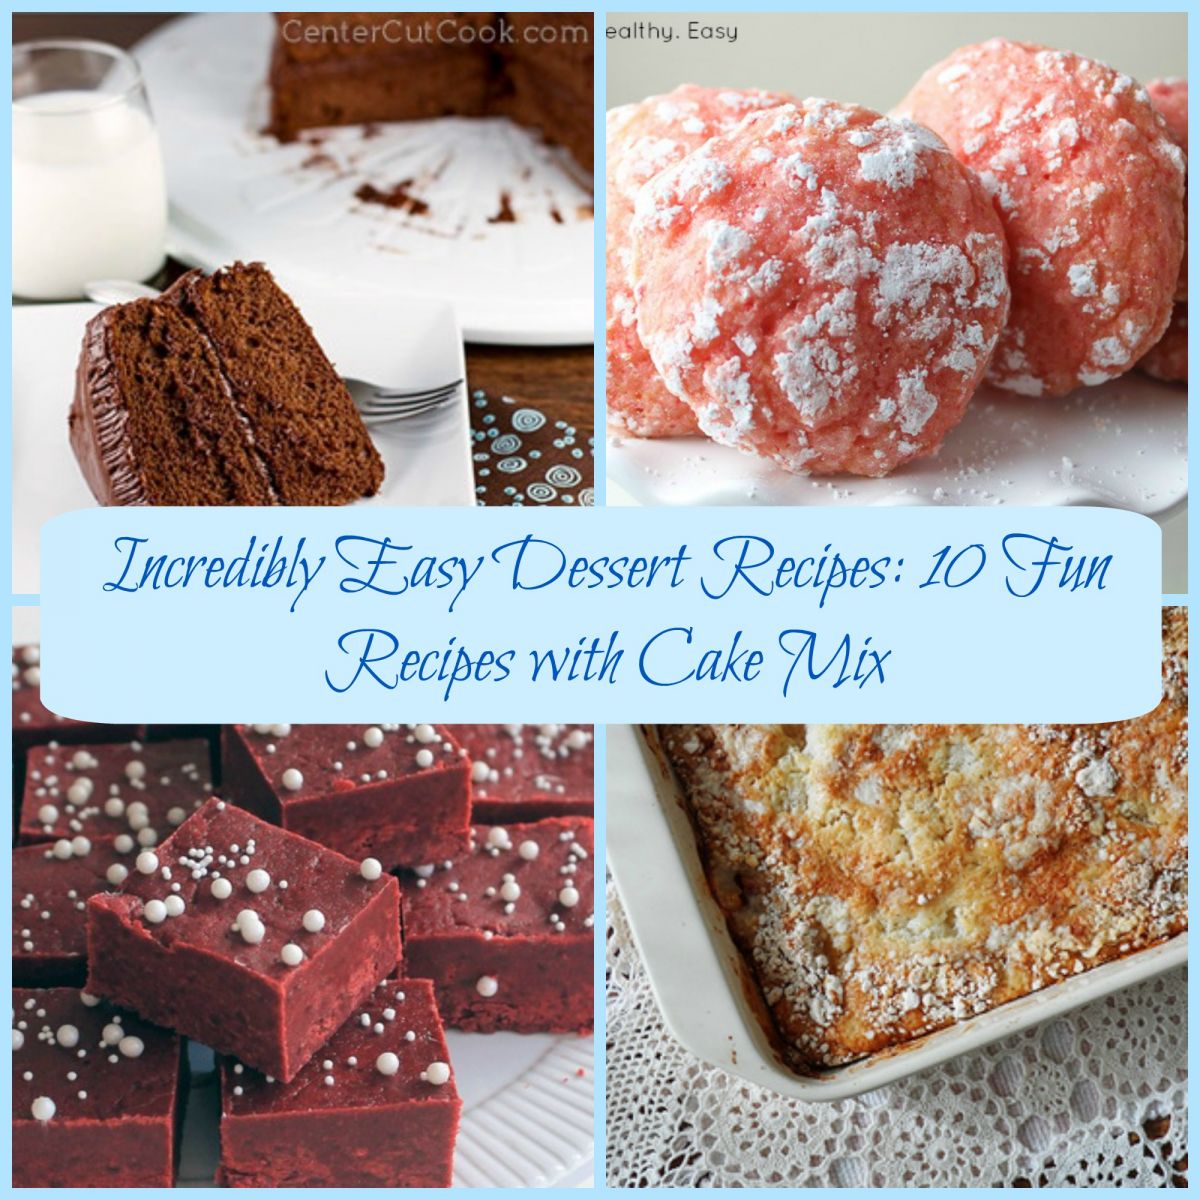 Incredibly Easy Dessert Recipes: 10 Fun Recipes with Cake Mix Read